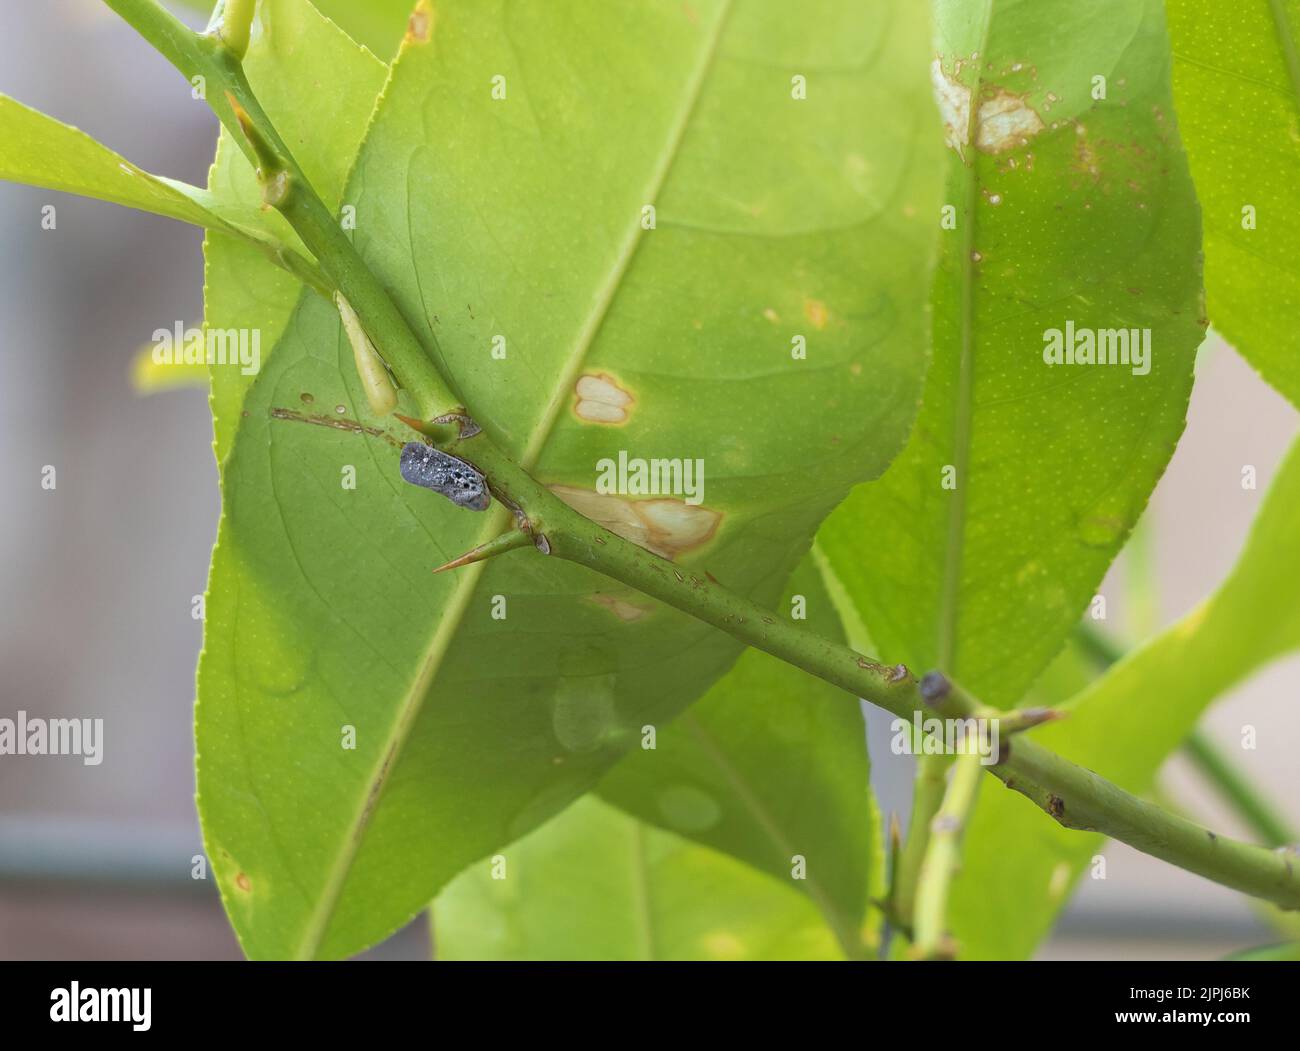 Leaf of a plant infested by a pest - Pests everywhere concept. Close up citrus tree pests Stock Photo